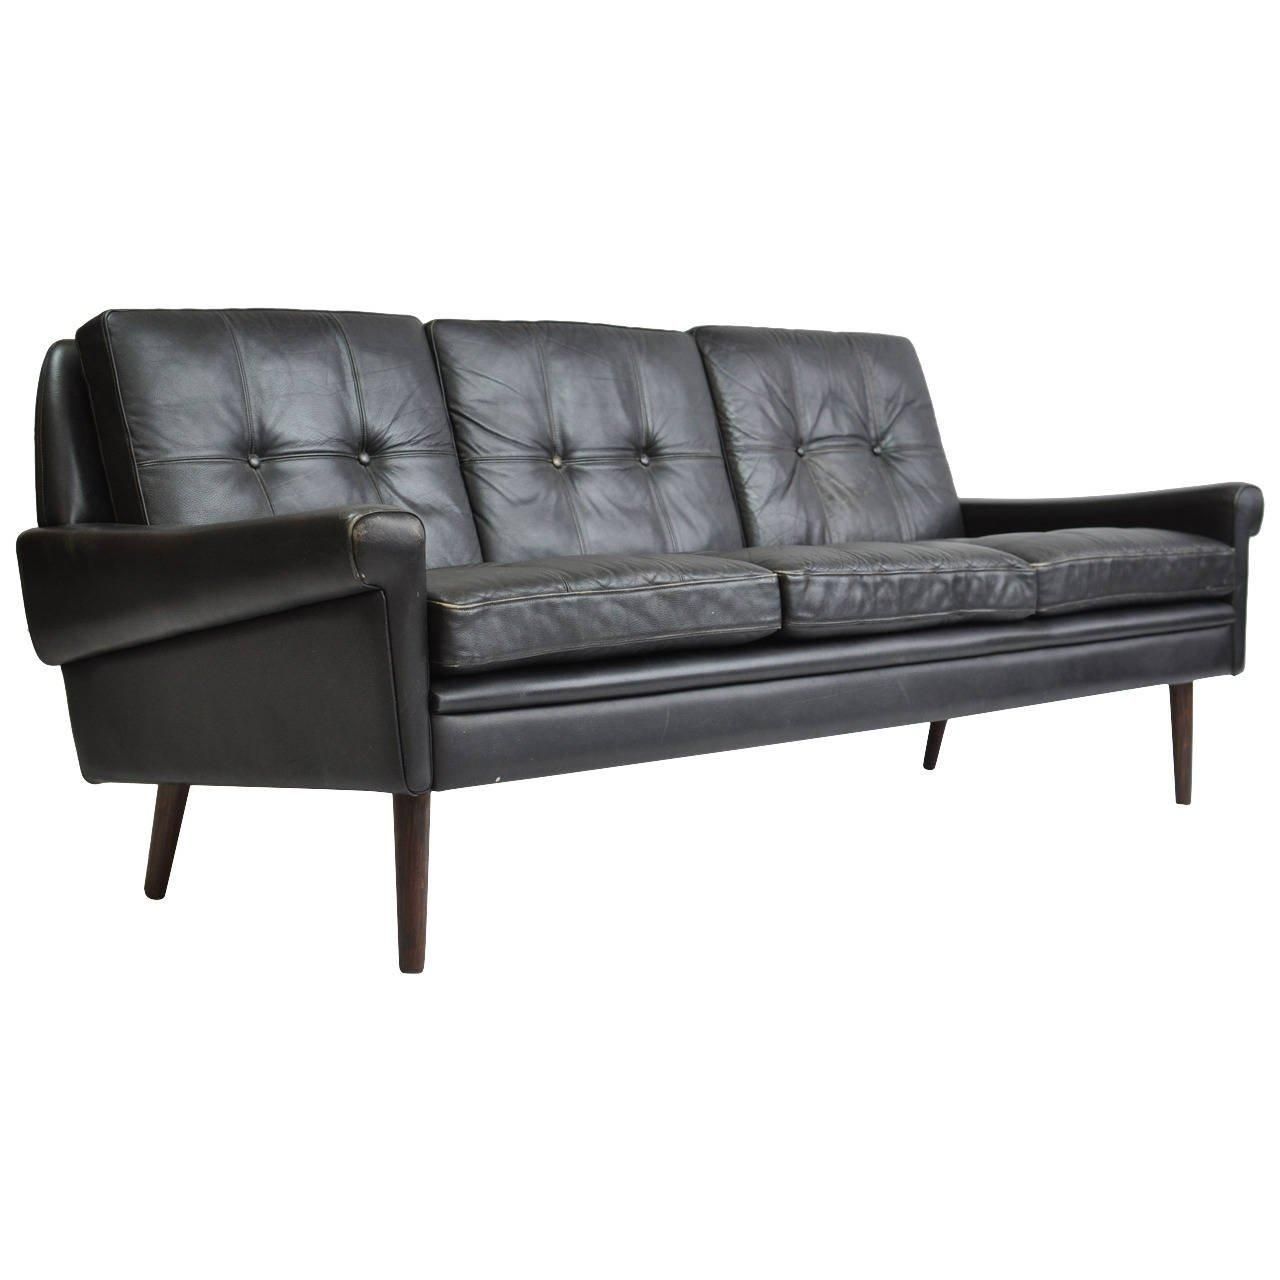 Danish Leather Sofasvend Skipper At 1Stdibs Within Danish Leather Sofas (View 12 of 20)